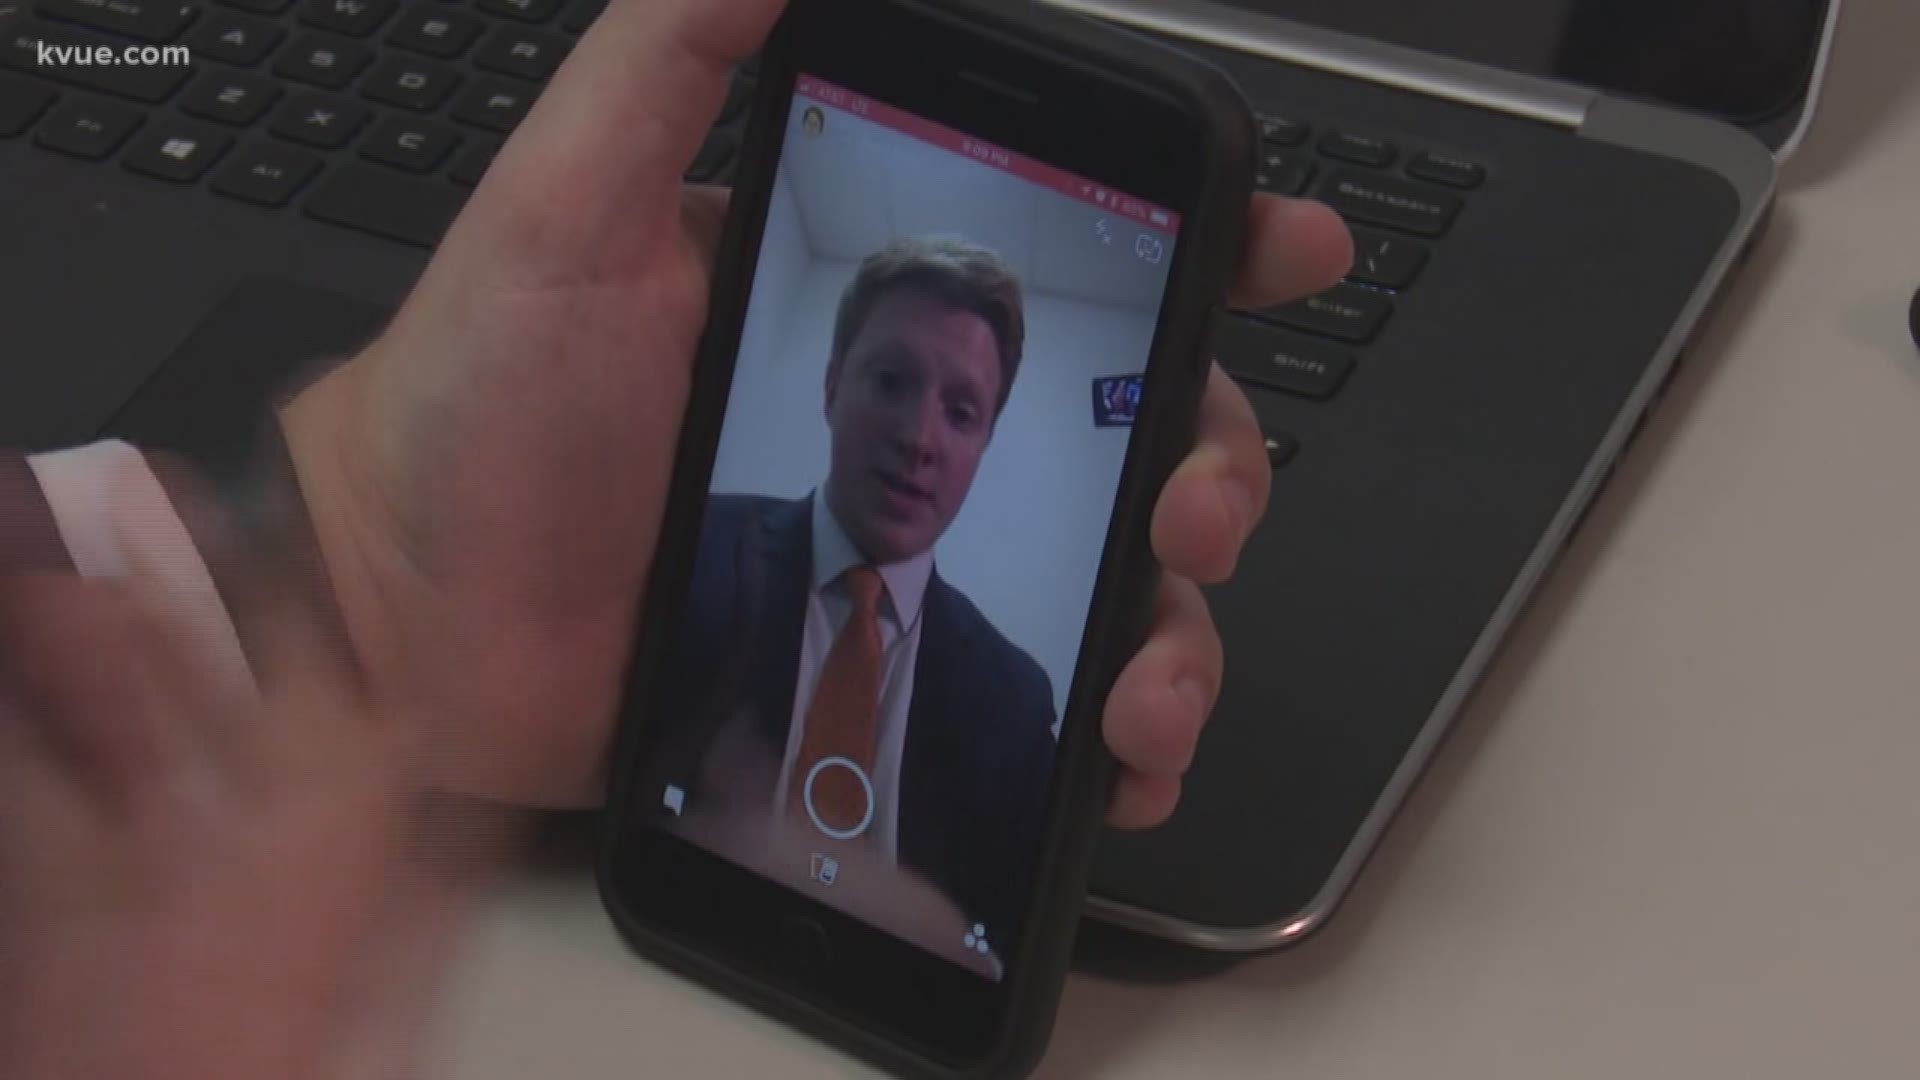 School officials say somebody is using Snapchat to send "graphic" images of female students.